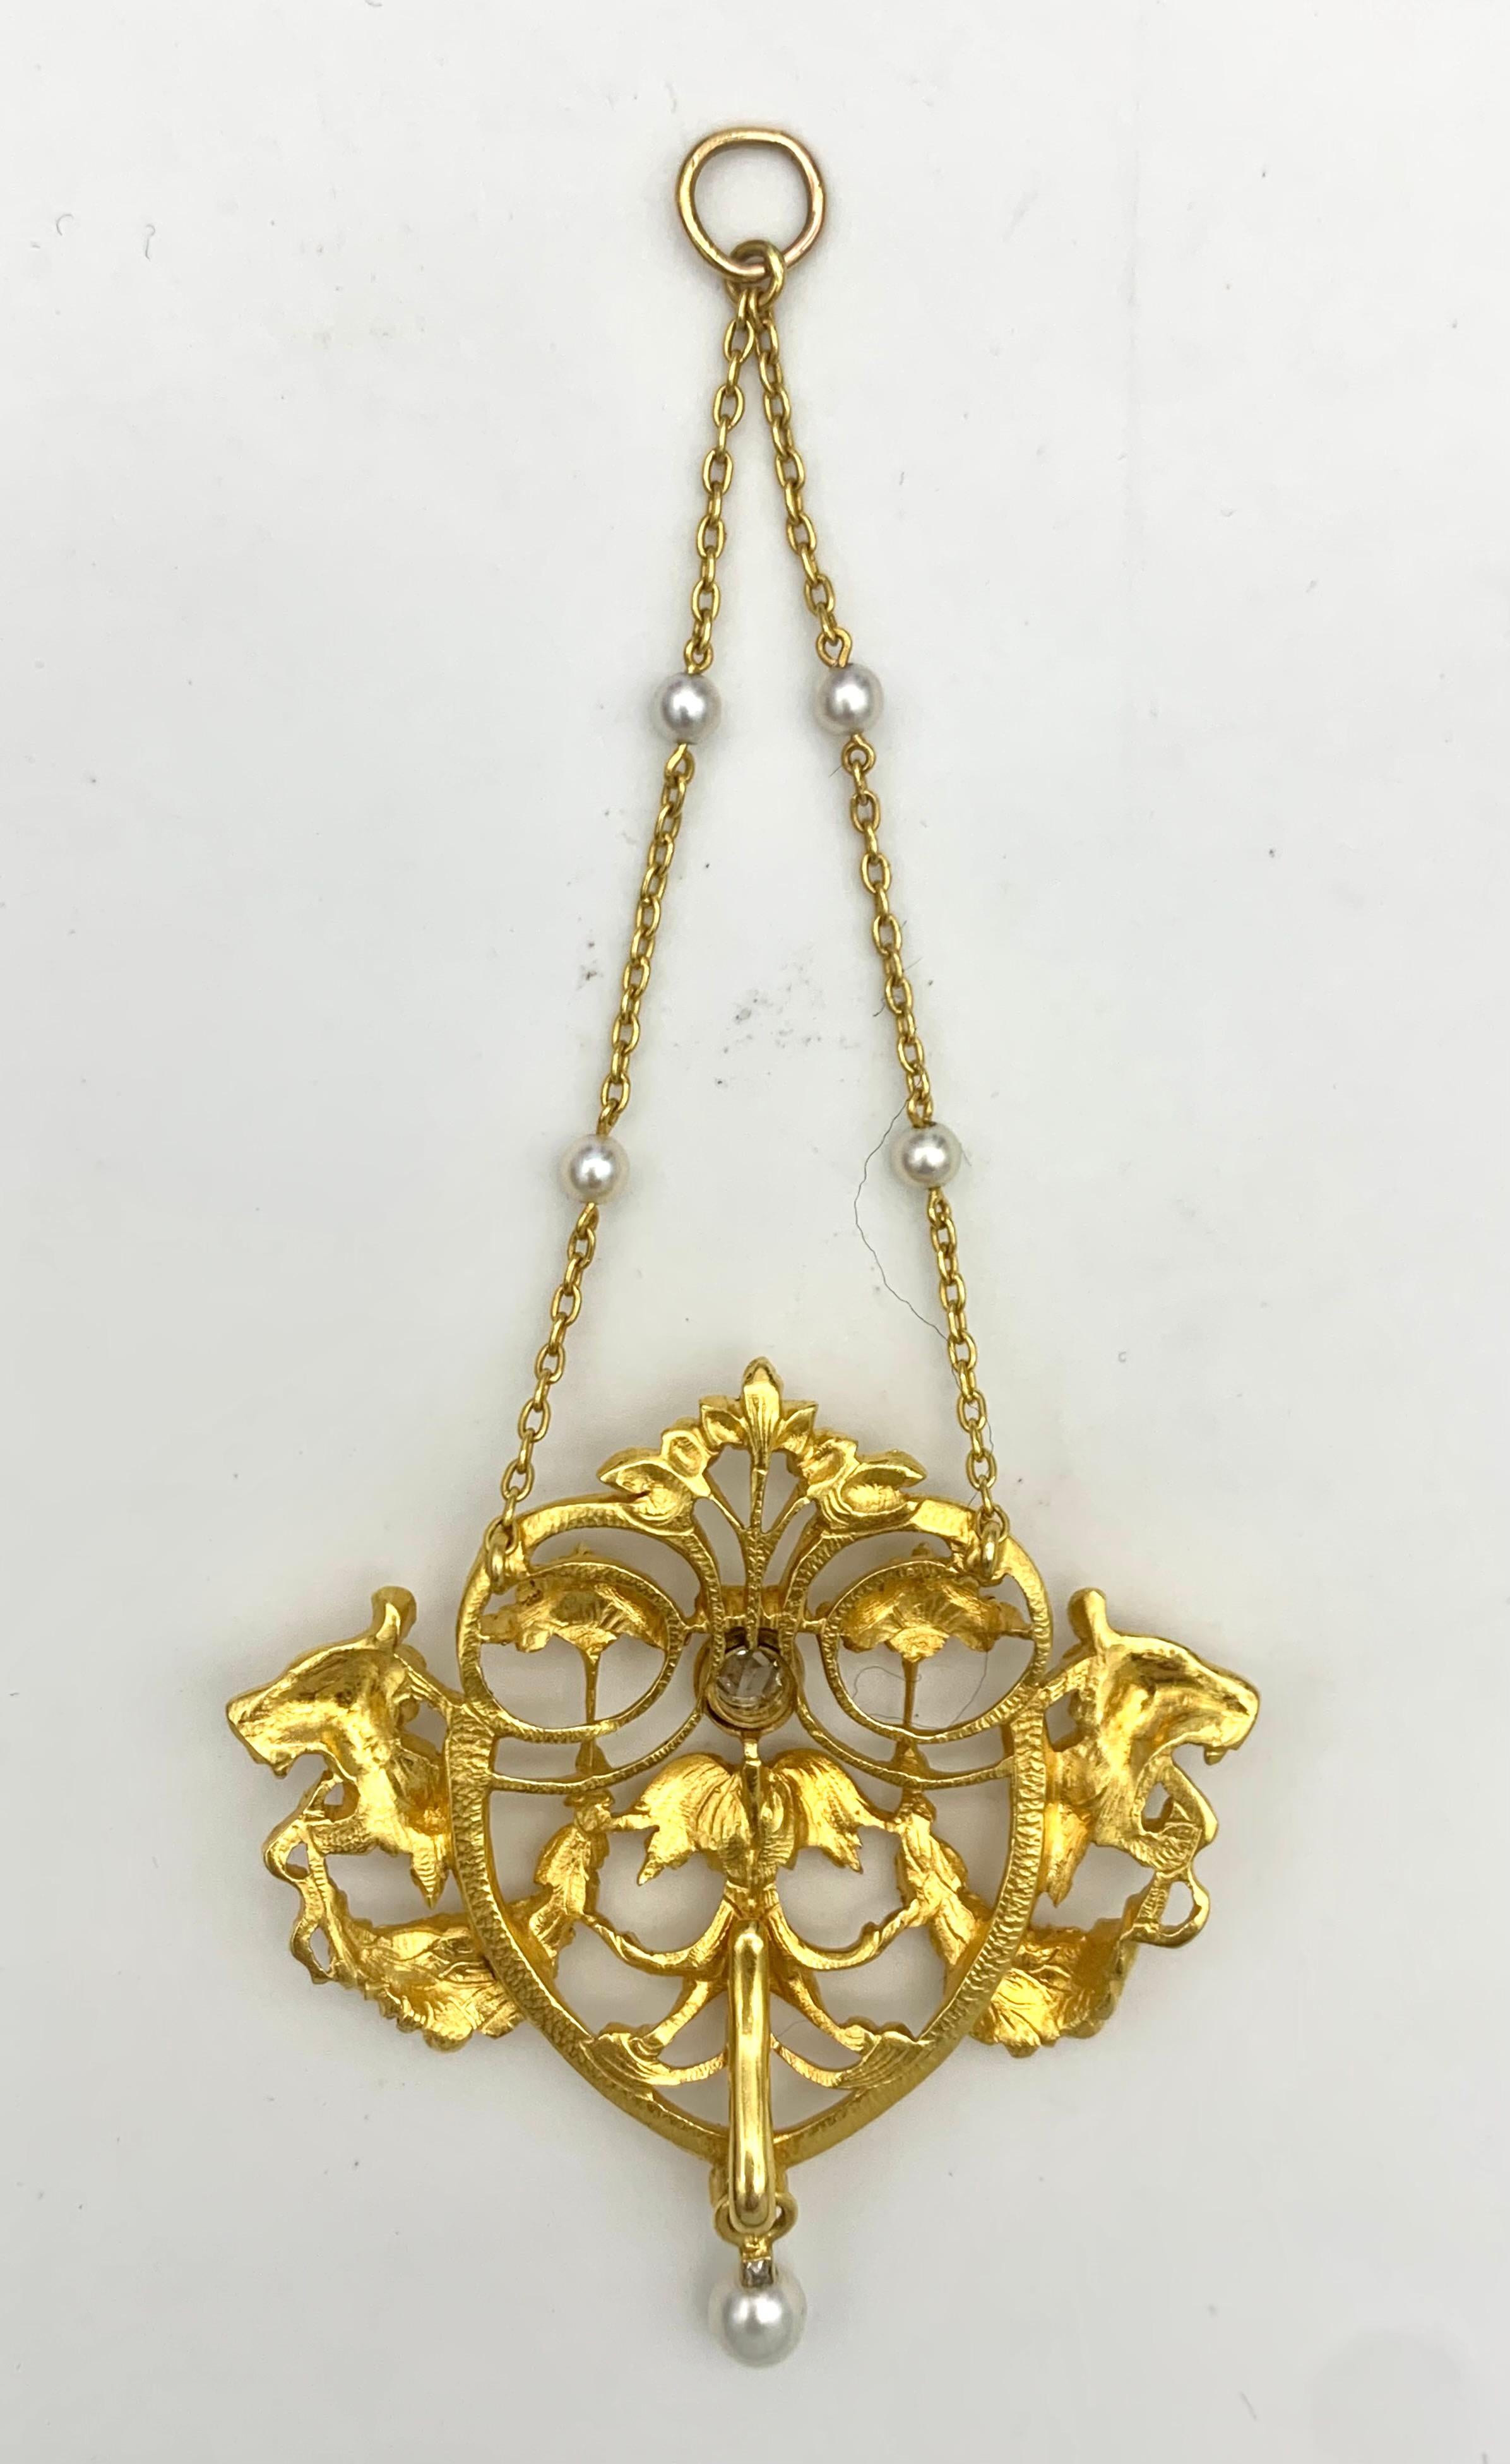 This elegant pendant has been made out 18 karat gold in the last decade of the 19th century. It is suspended from gold chains embellished with natural oriental pearls. The two lions heads in profile hold flower and fruit garlands in their mouth. The